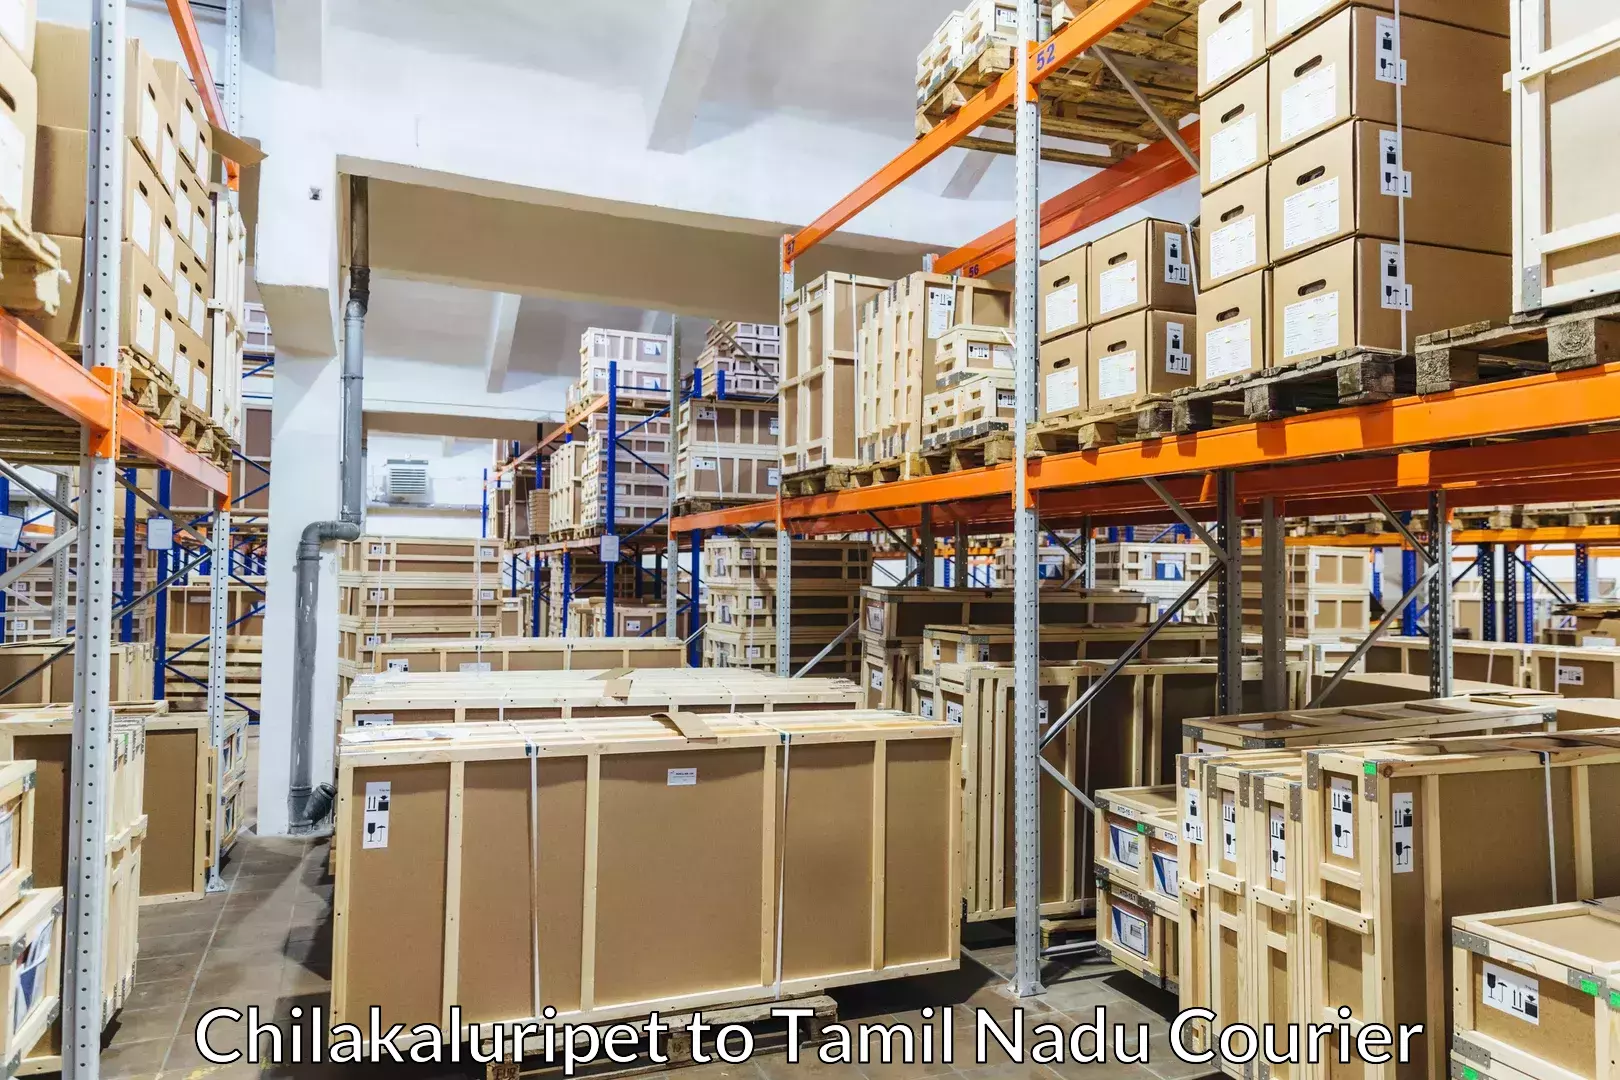 Efficient relocation services Chilakaluripet to Sathyamangalam